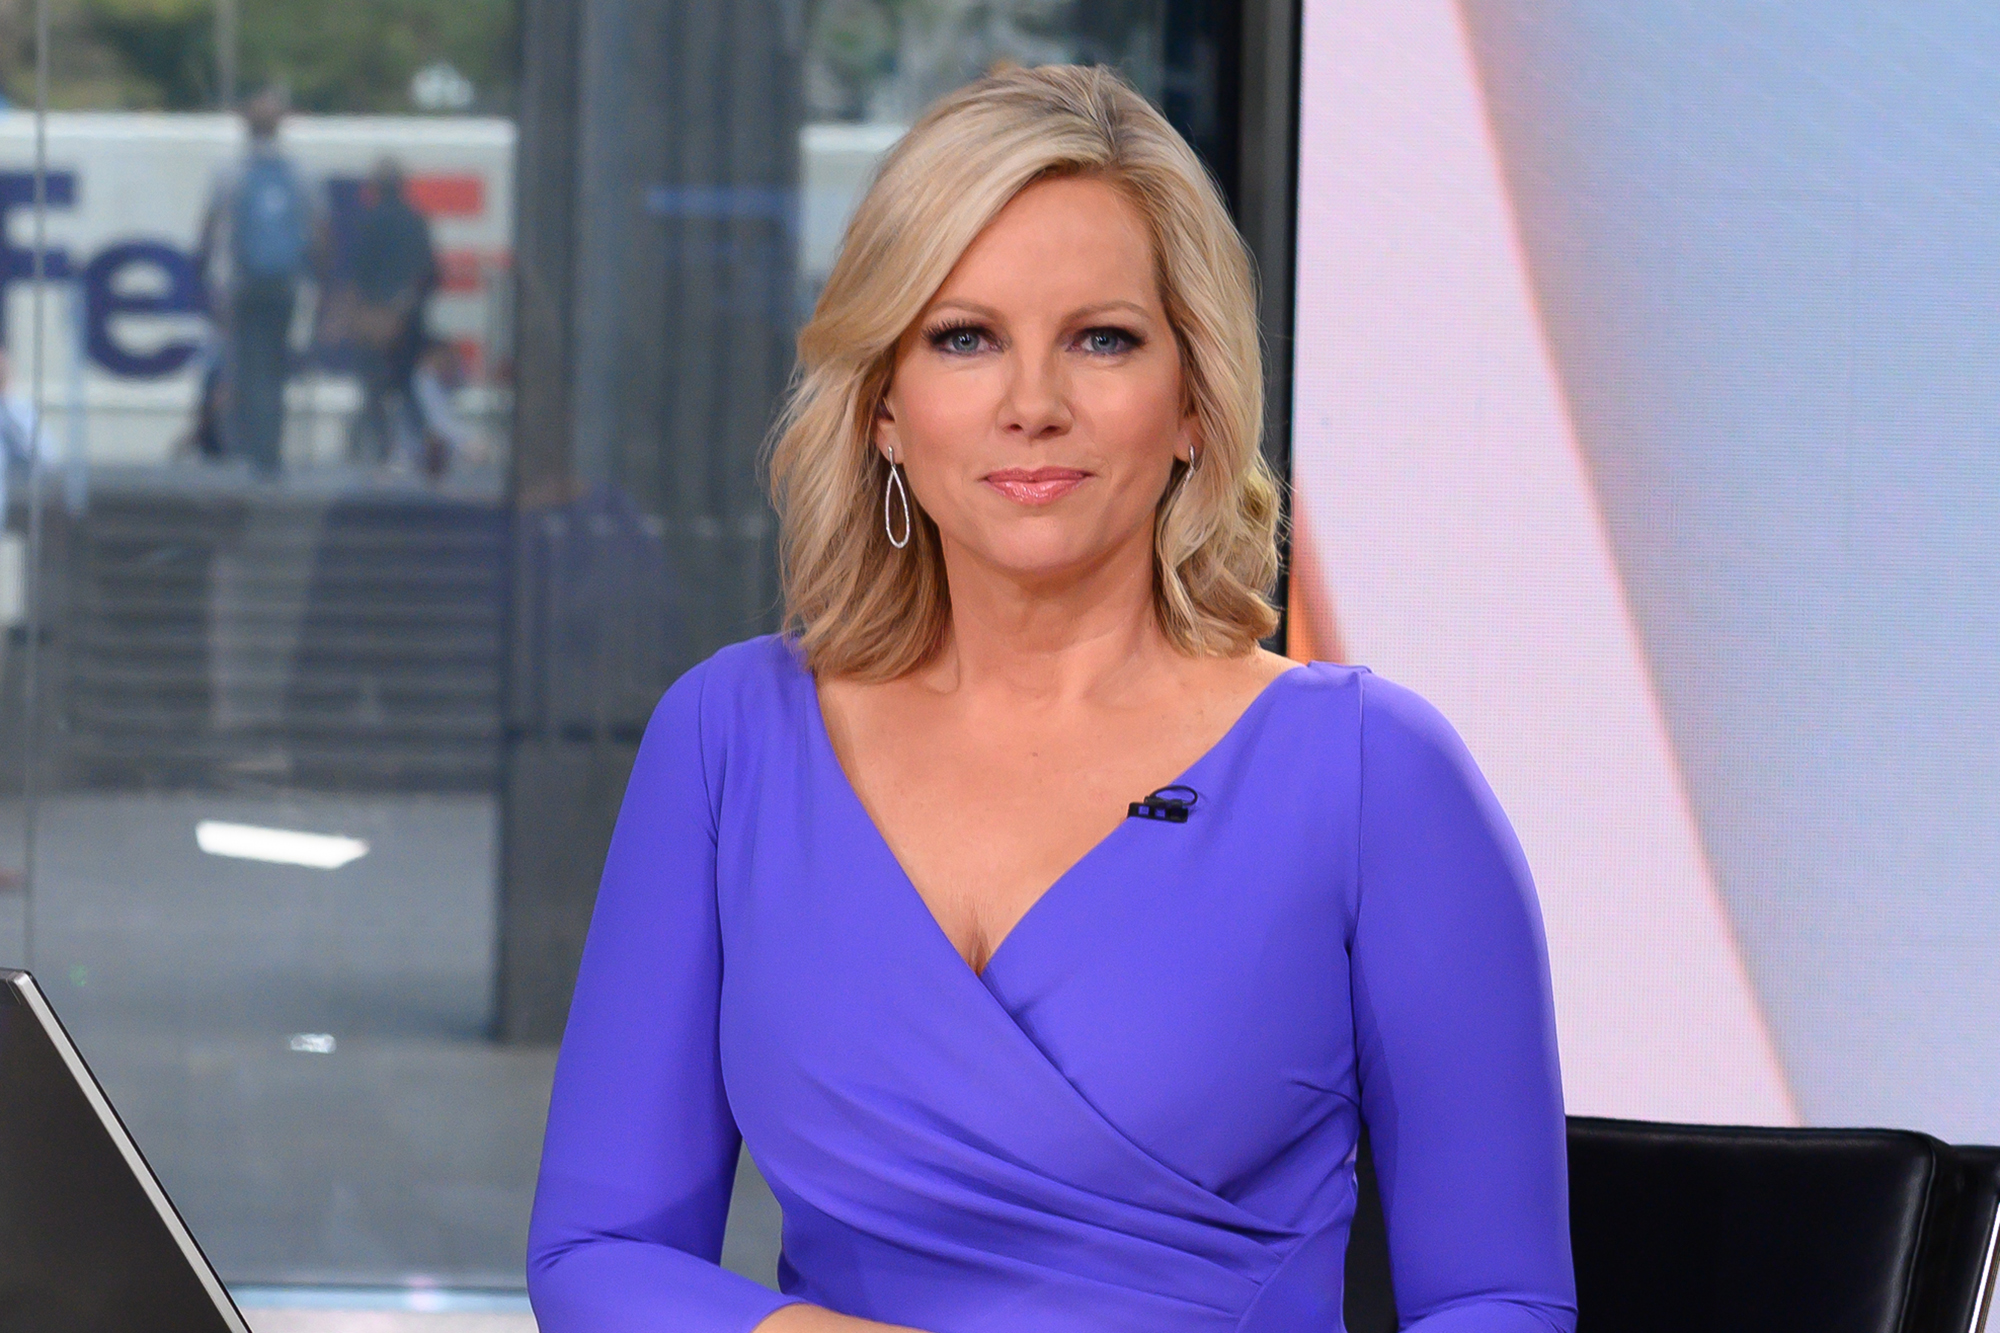 christopher bjorkman recommends shannon bream hot pictures pic